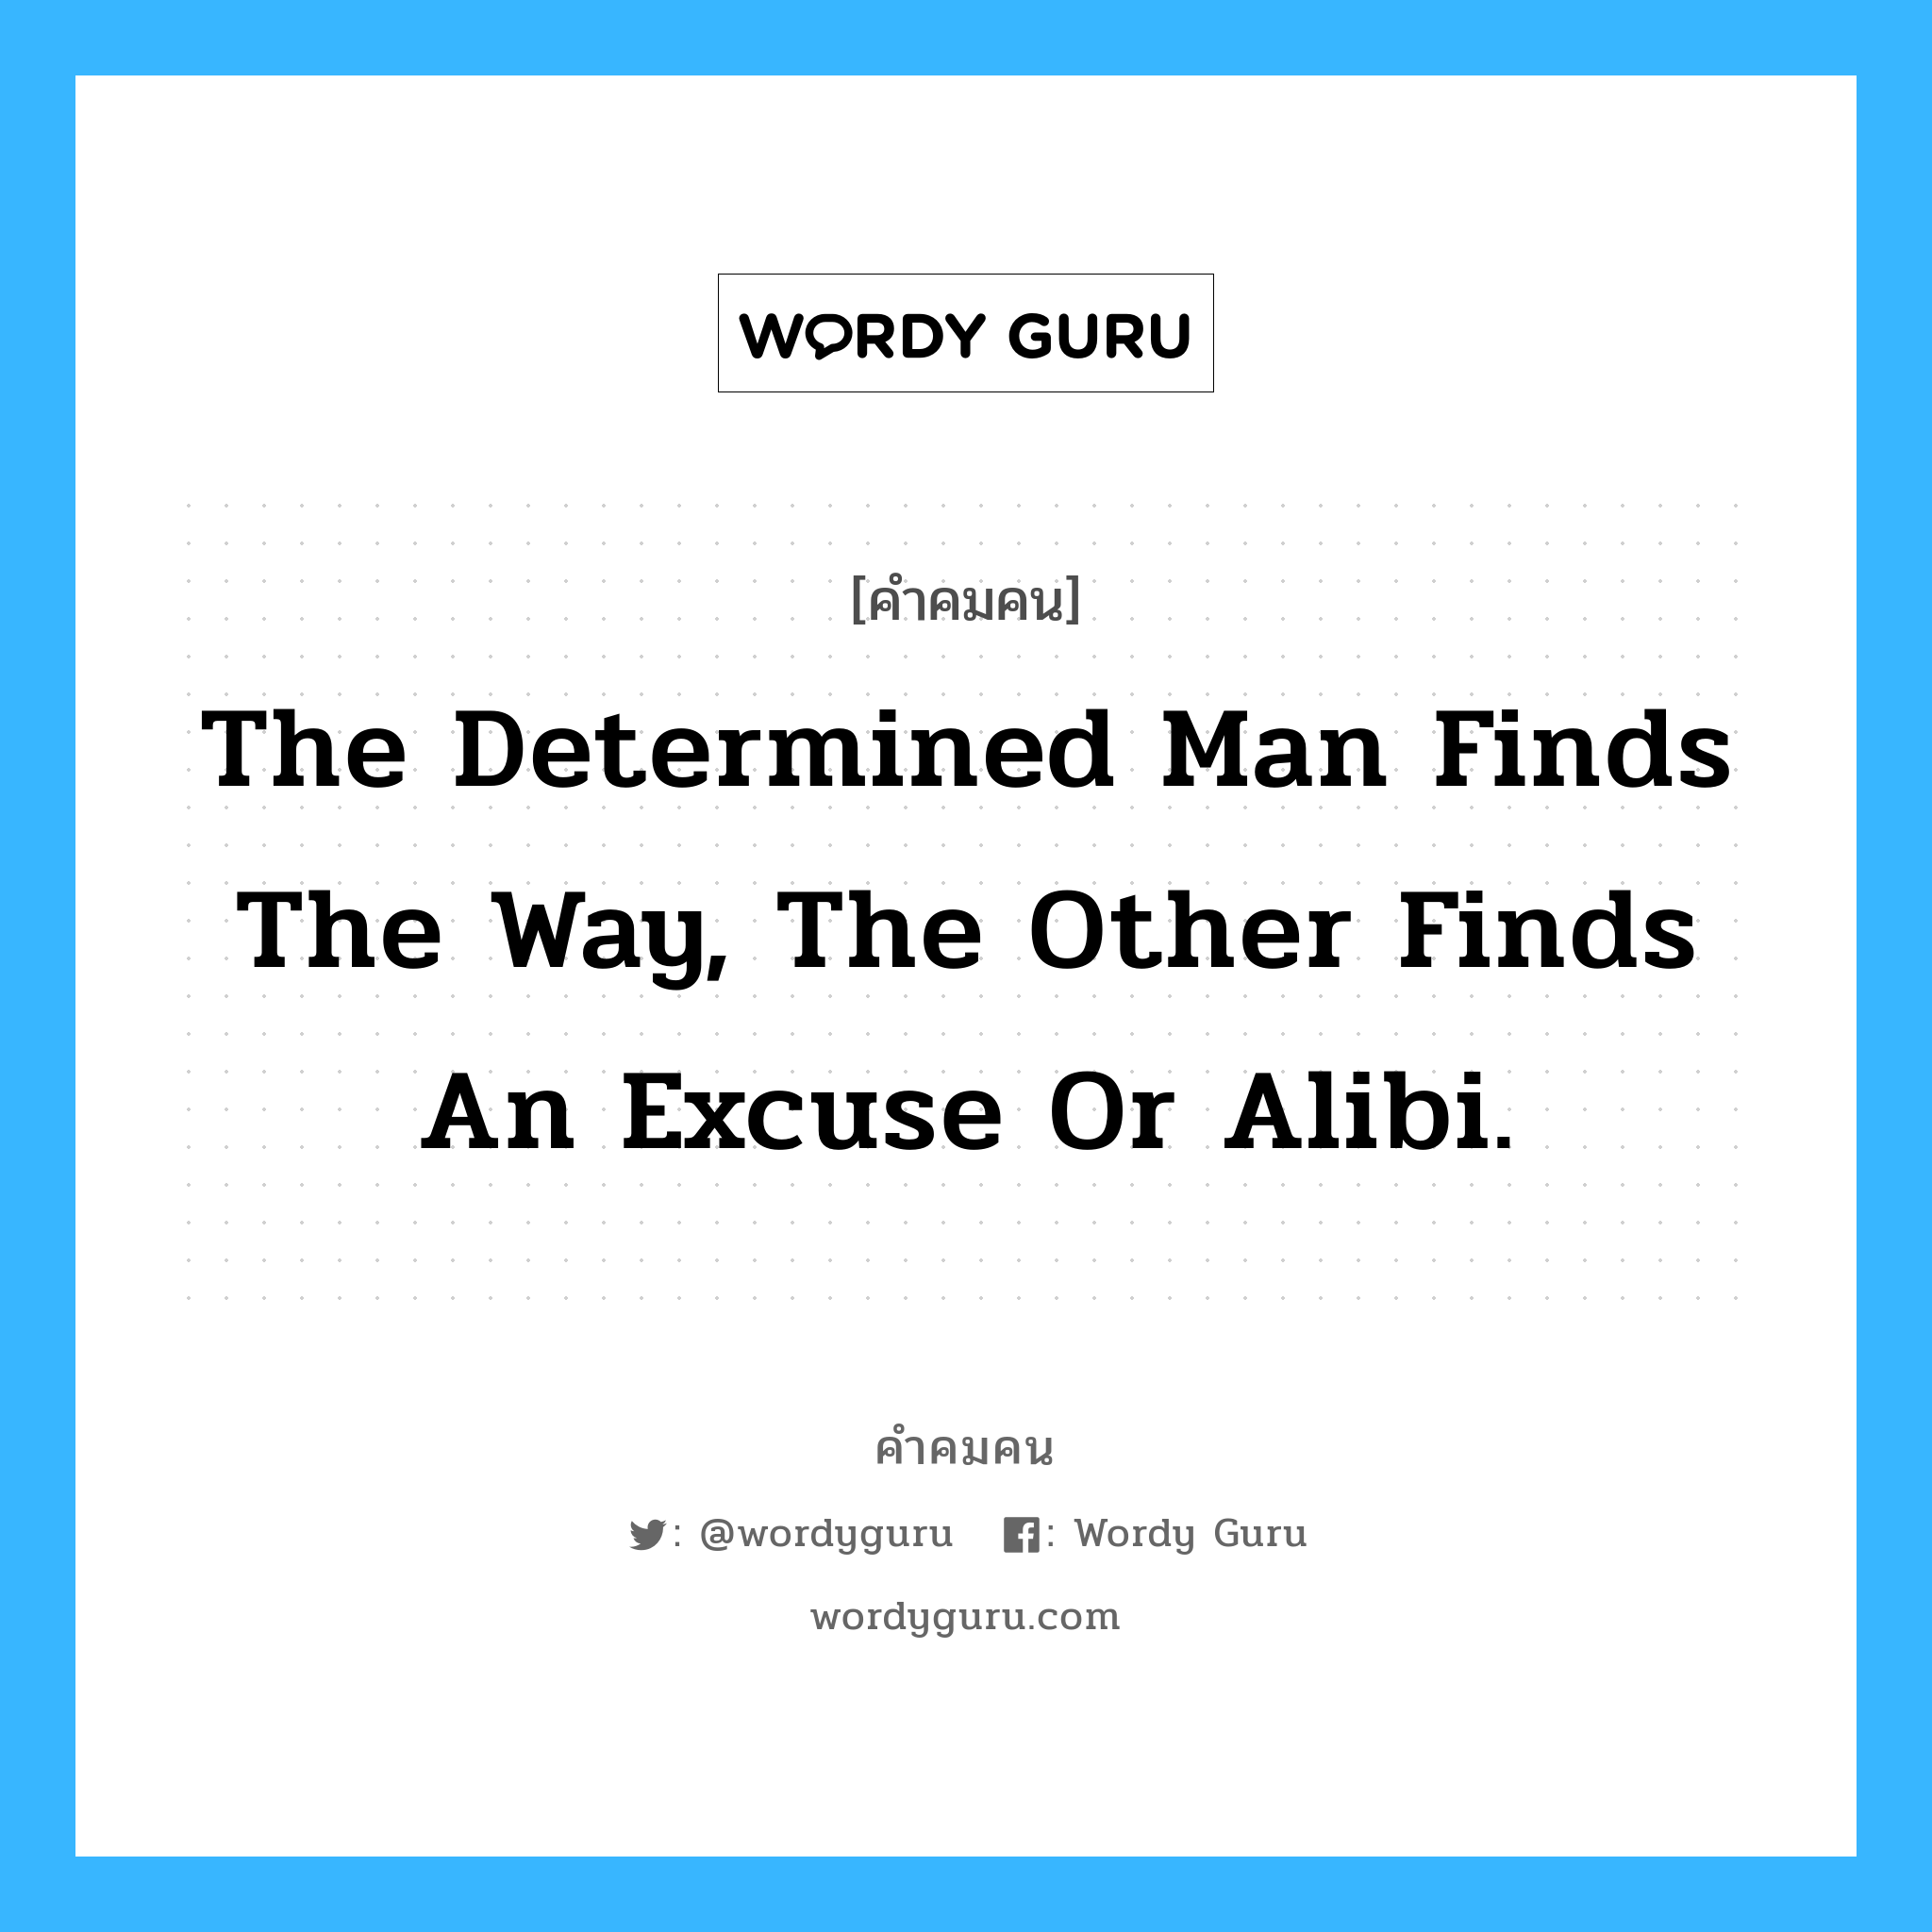 The determined man finds the way, the other finds an excuse or alibi., คำคมคน The determined man finds the way, the other finds an excuse or alibi. ผู้ที่แน่วแน่และมุ่งมั่นจะหาหนทางแก้ปัญหา ในขณะที่คนอื่นจะหาหนทางแก้ตัว Anonymous หมวด Anonymous